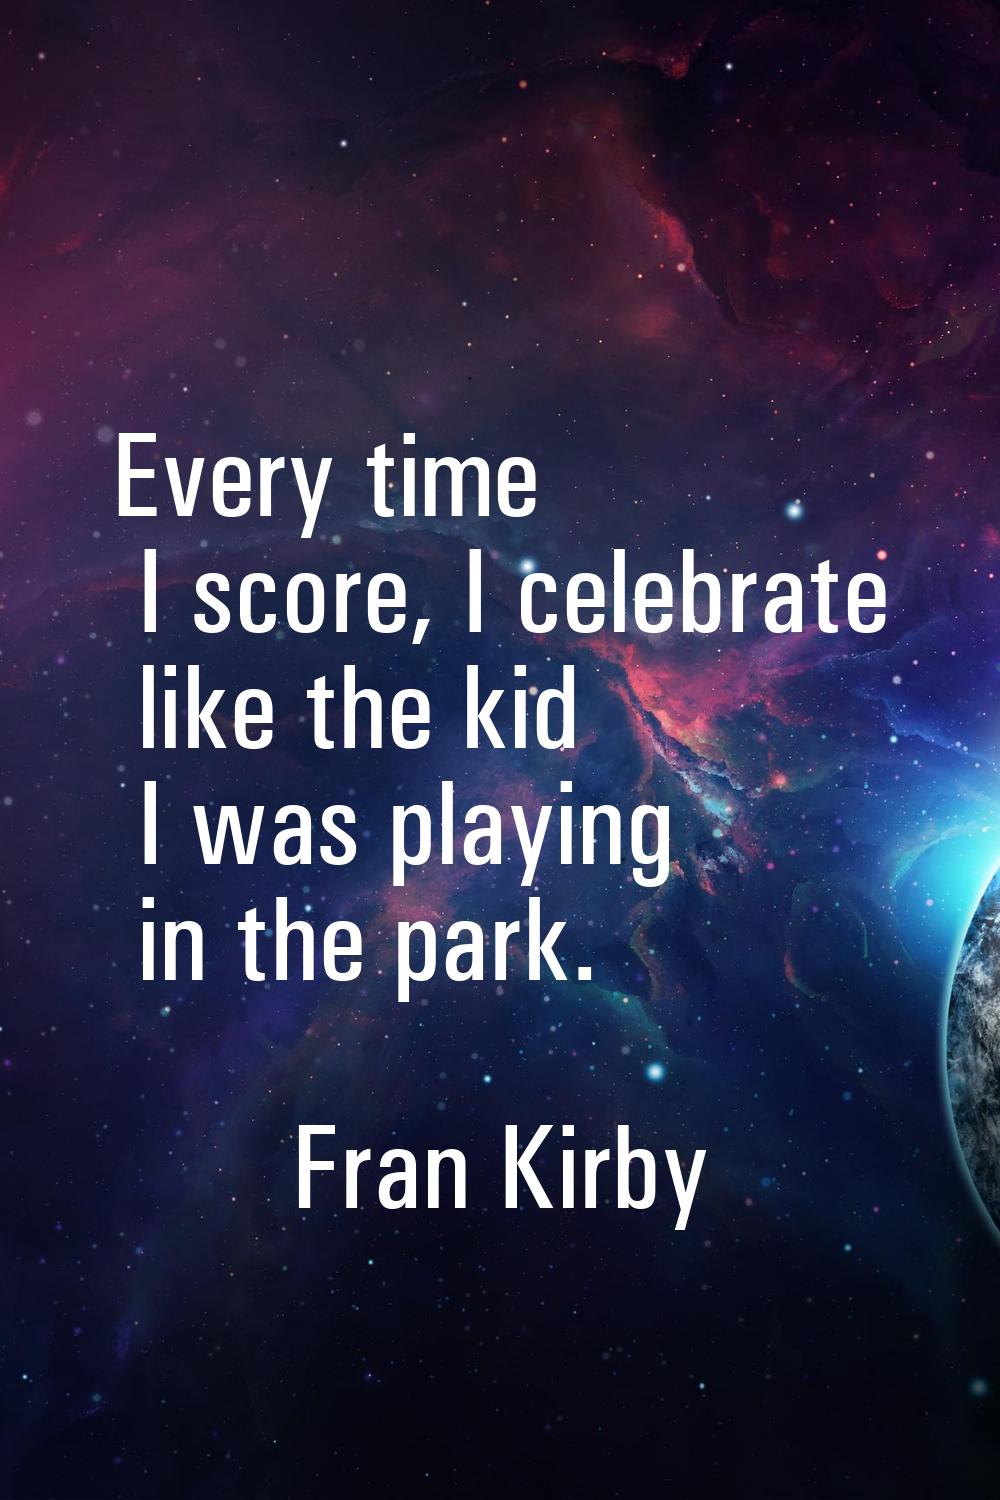 Every time I score, I celebrate like the kid I was playing in the park.